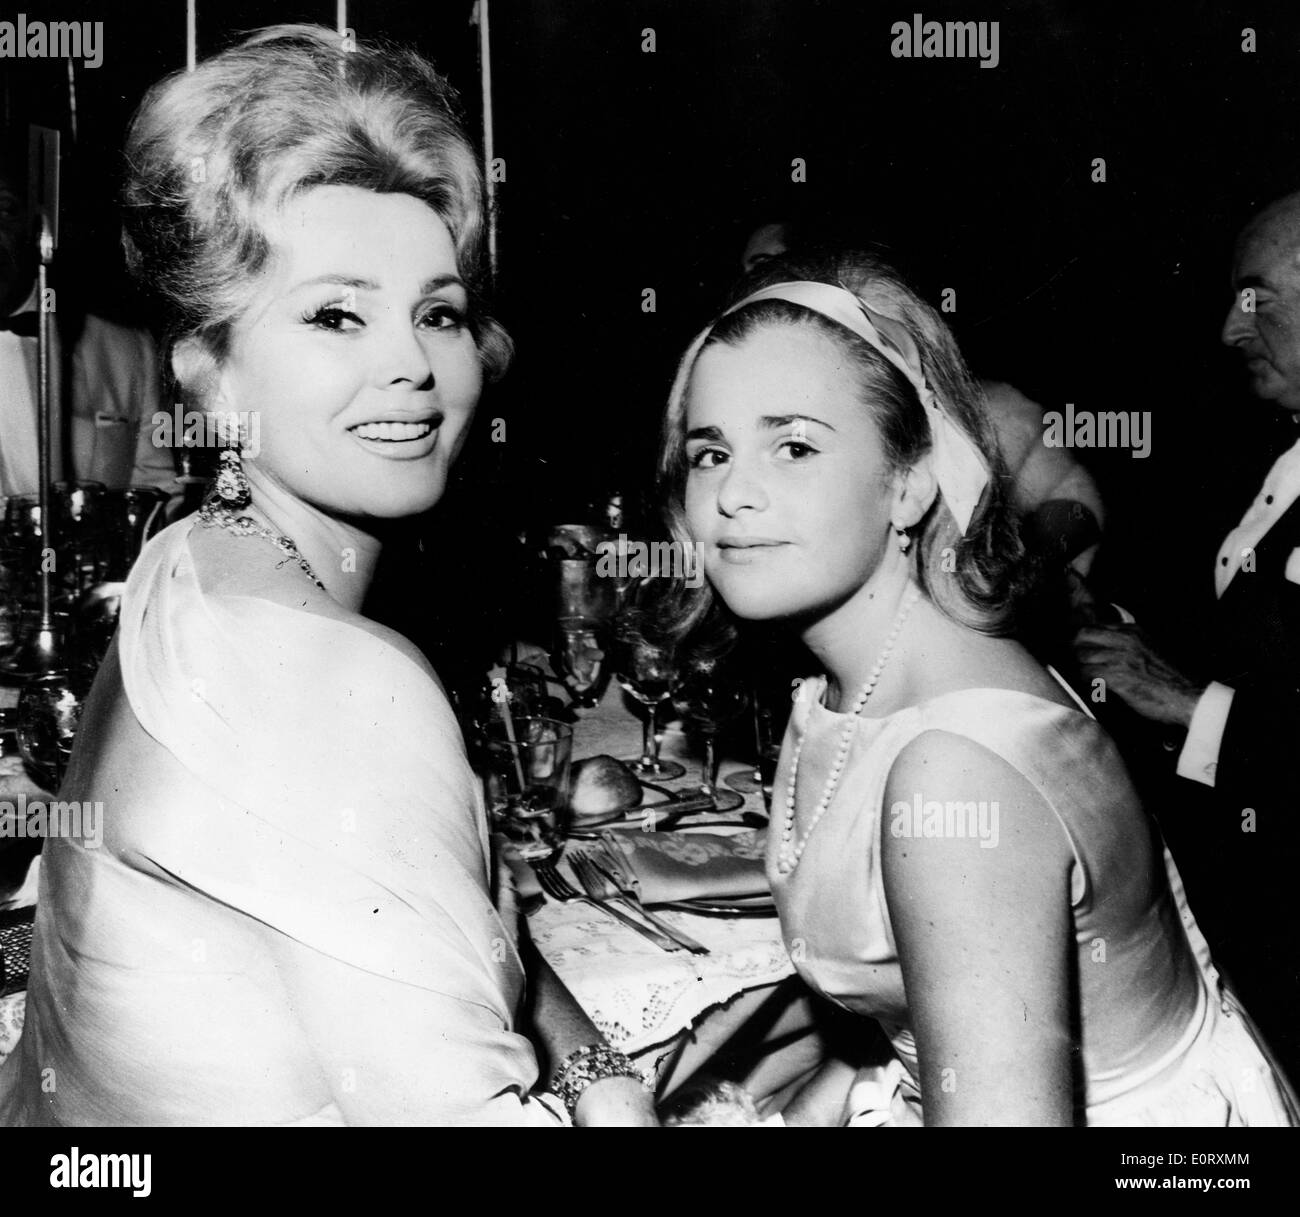 Actress Zsa Zsa Gabor at a party with daughter Stock Photo